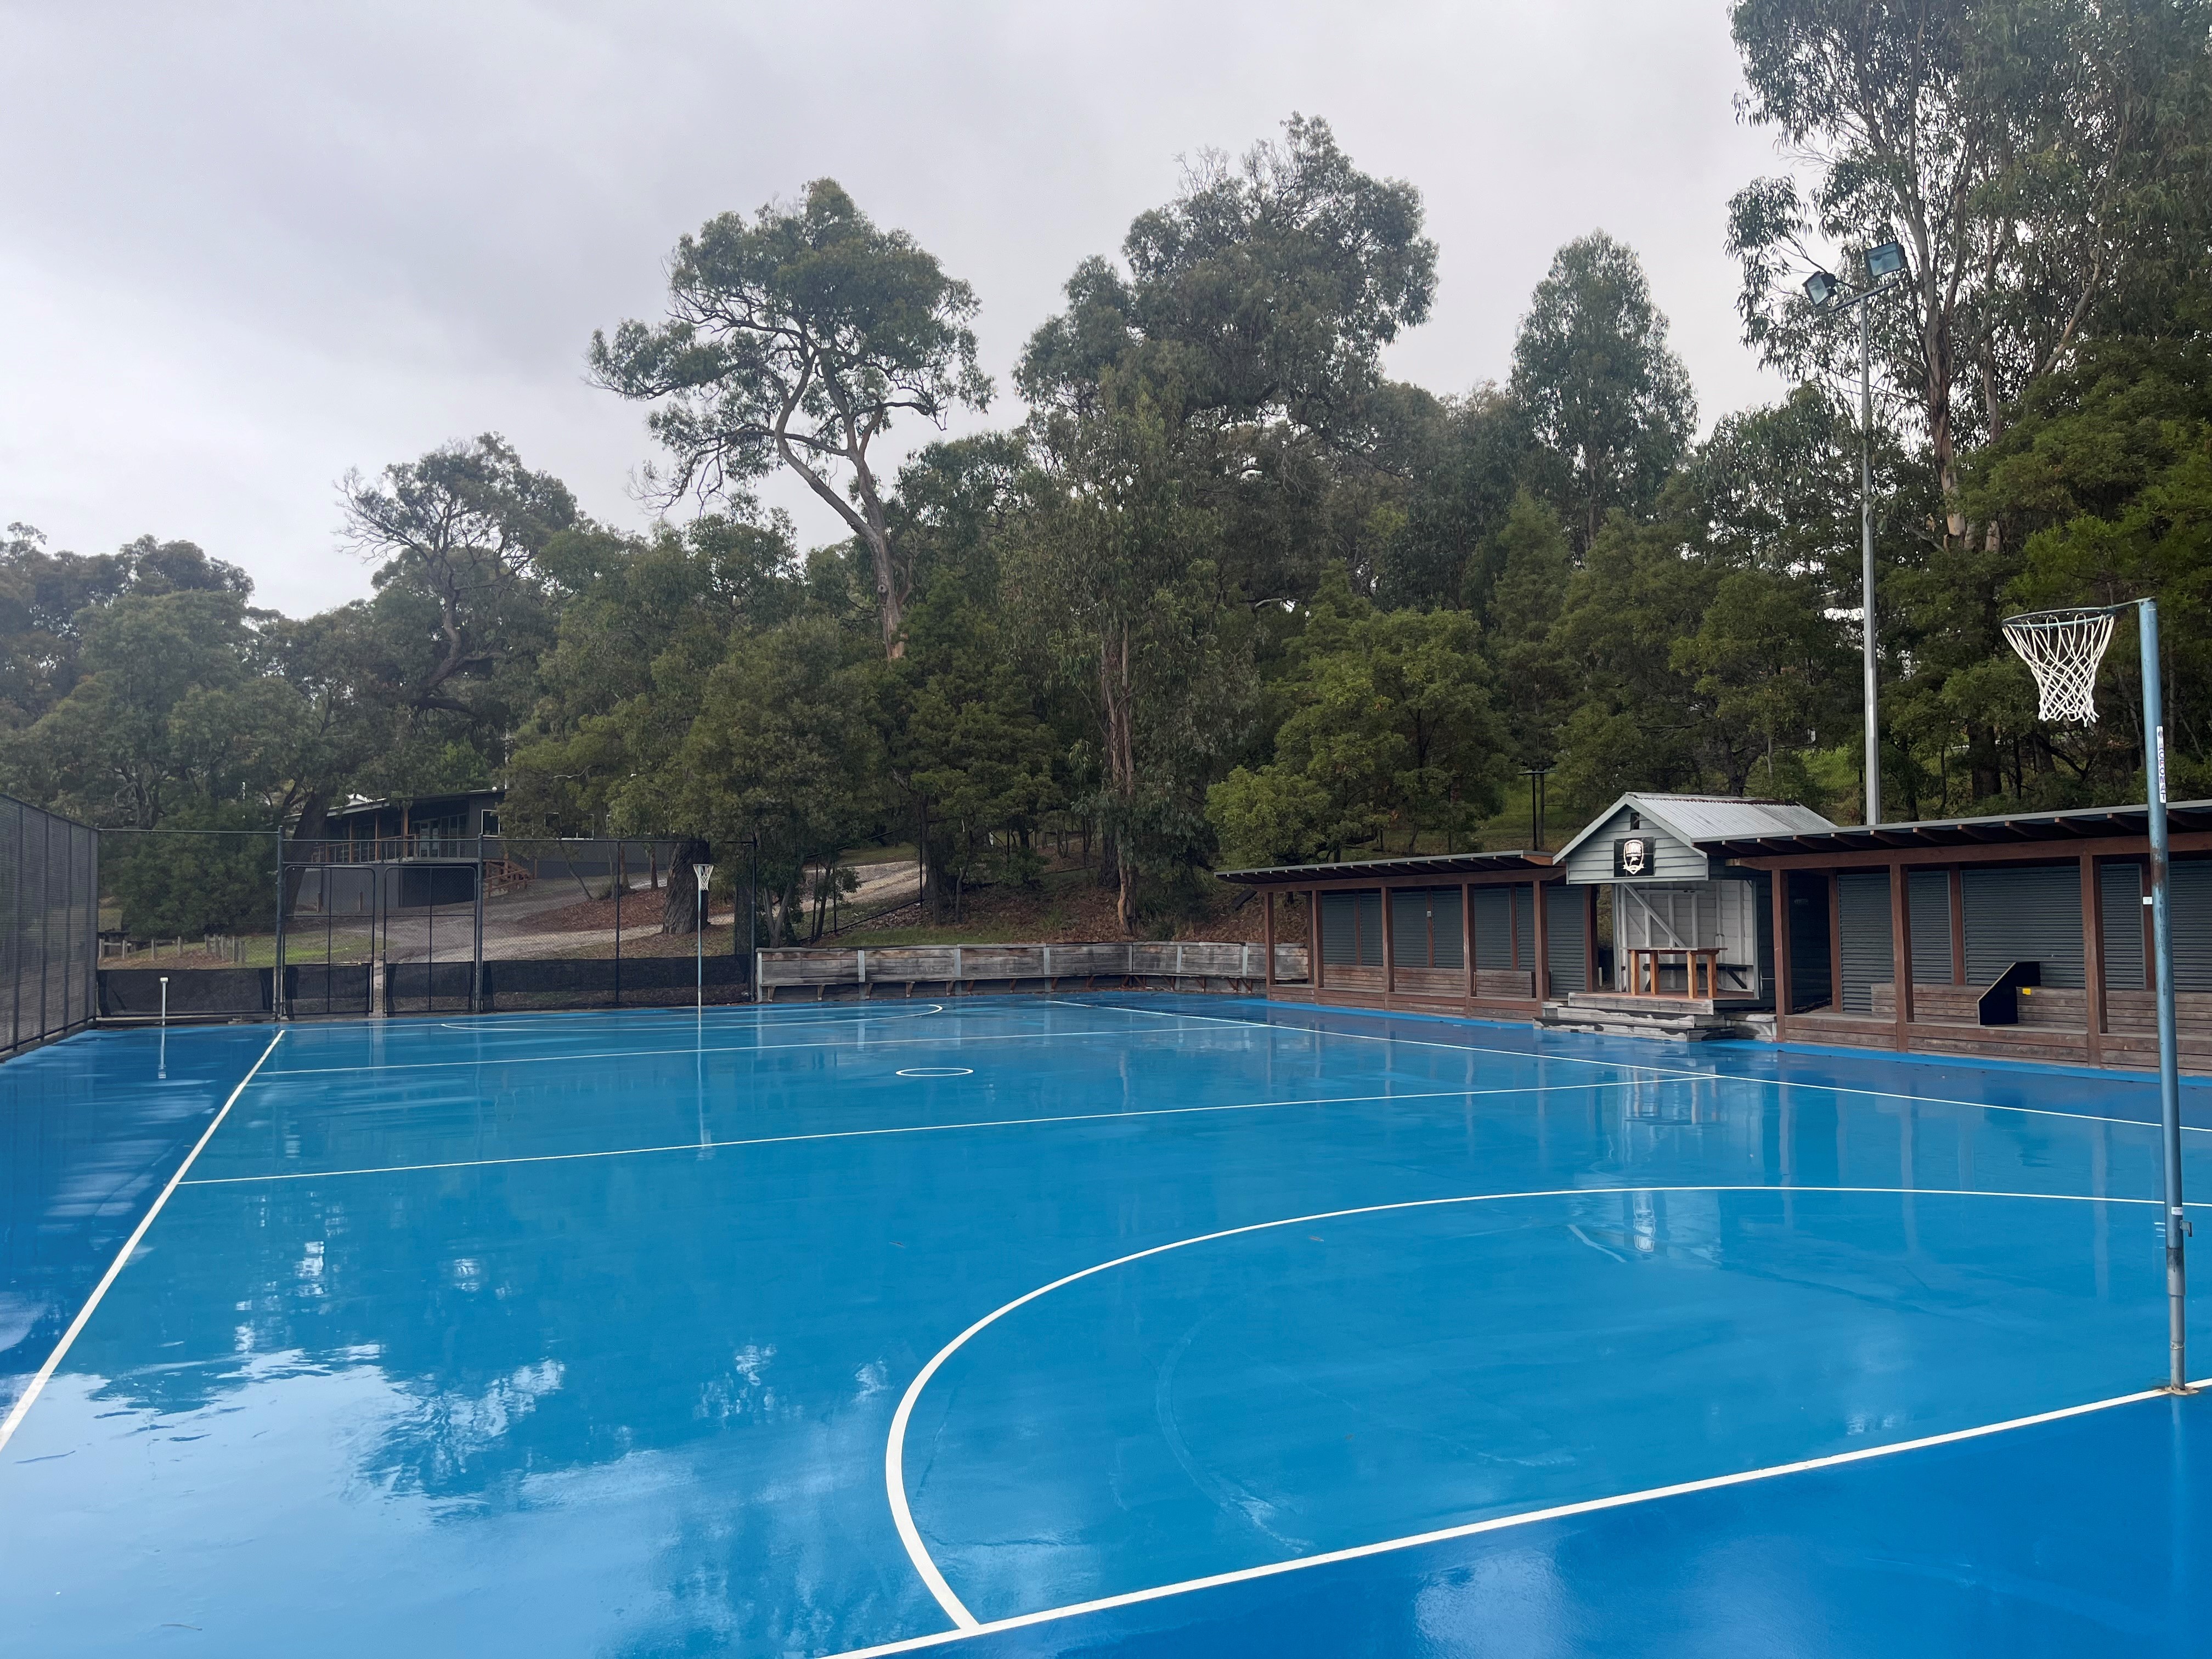 Lorne-Netball-Courts-with-bench.jpg